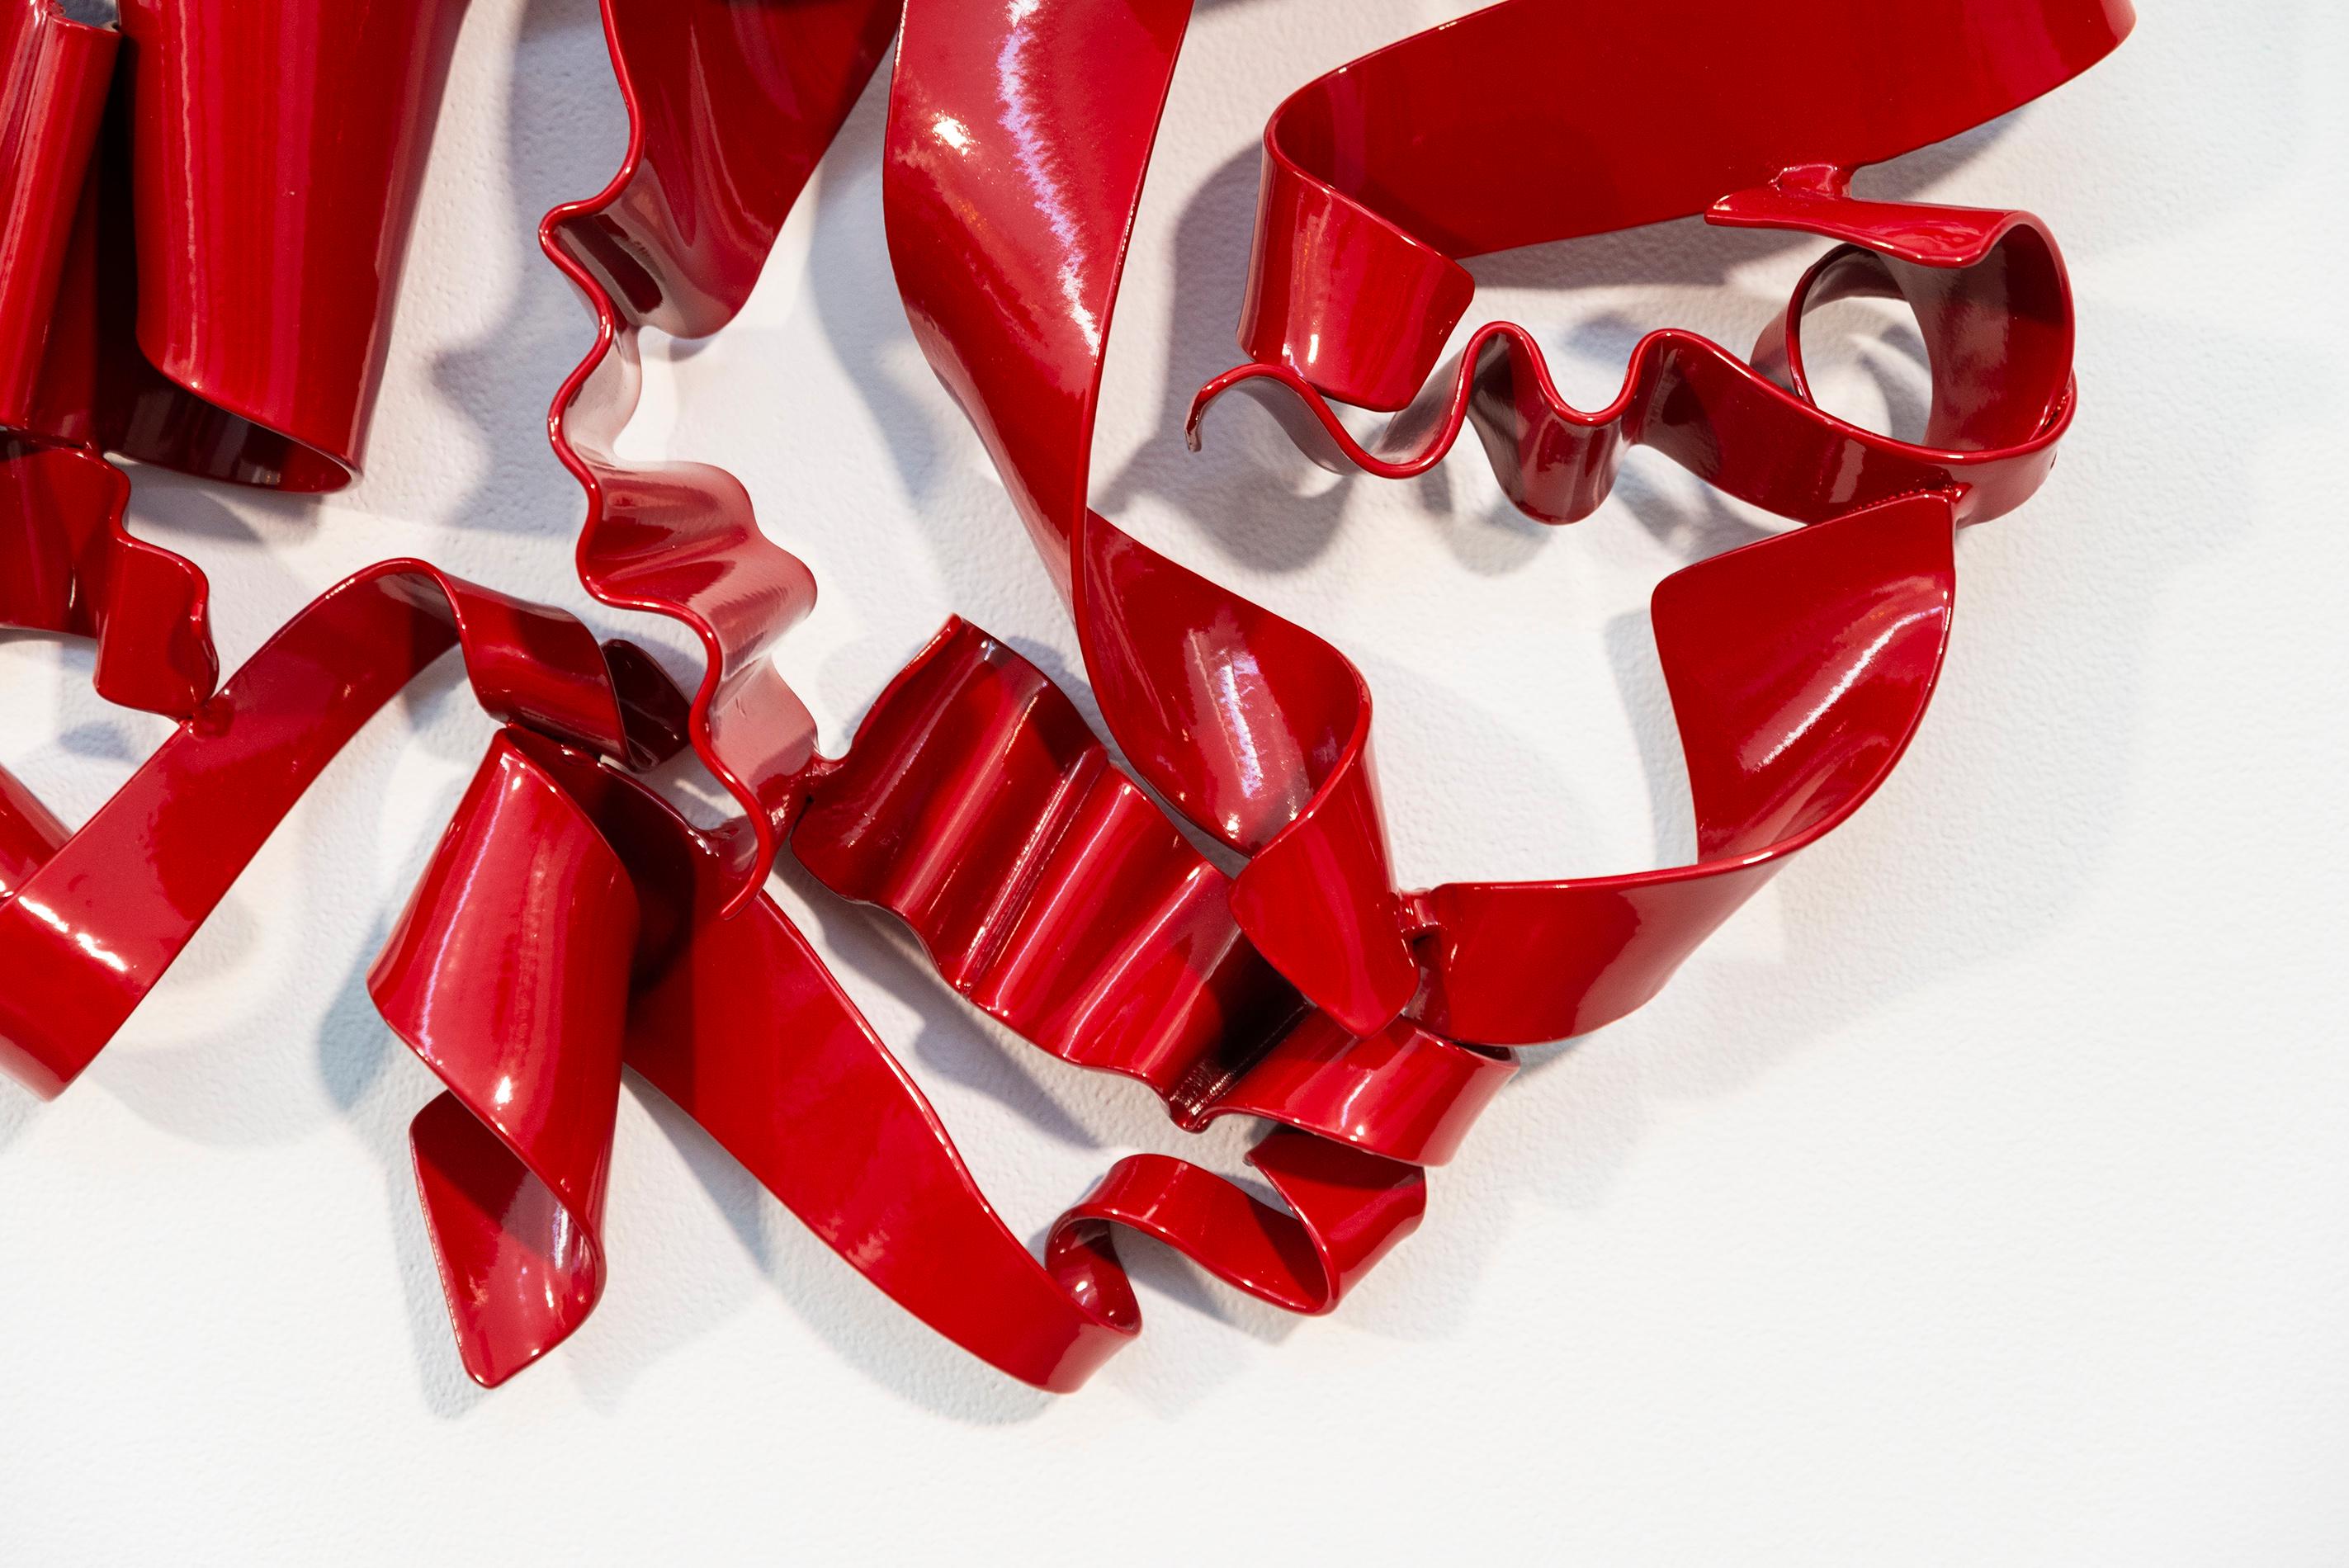 In a gorgeous candy coloured red, ribbons of steel swirl together curling and overlapping to form a circle. This is the dynamic work of Stefan Duerst.
The German born sculptor creates brightly coloured abstract sculptures from steel; their clean